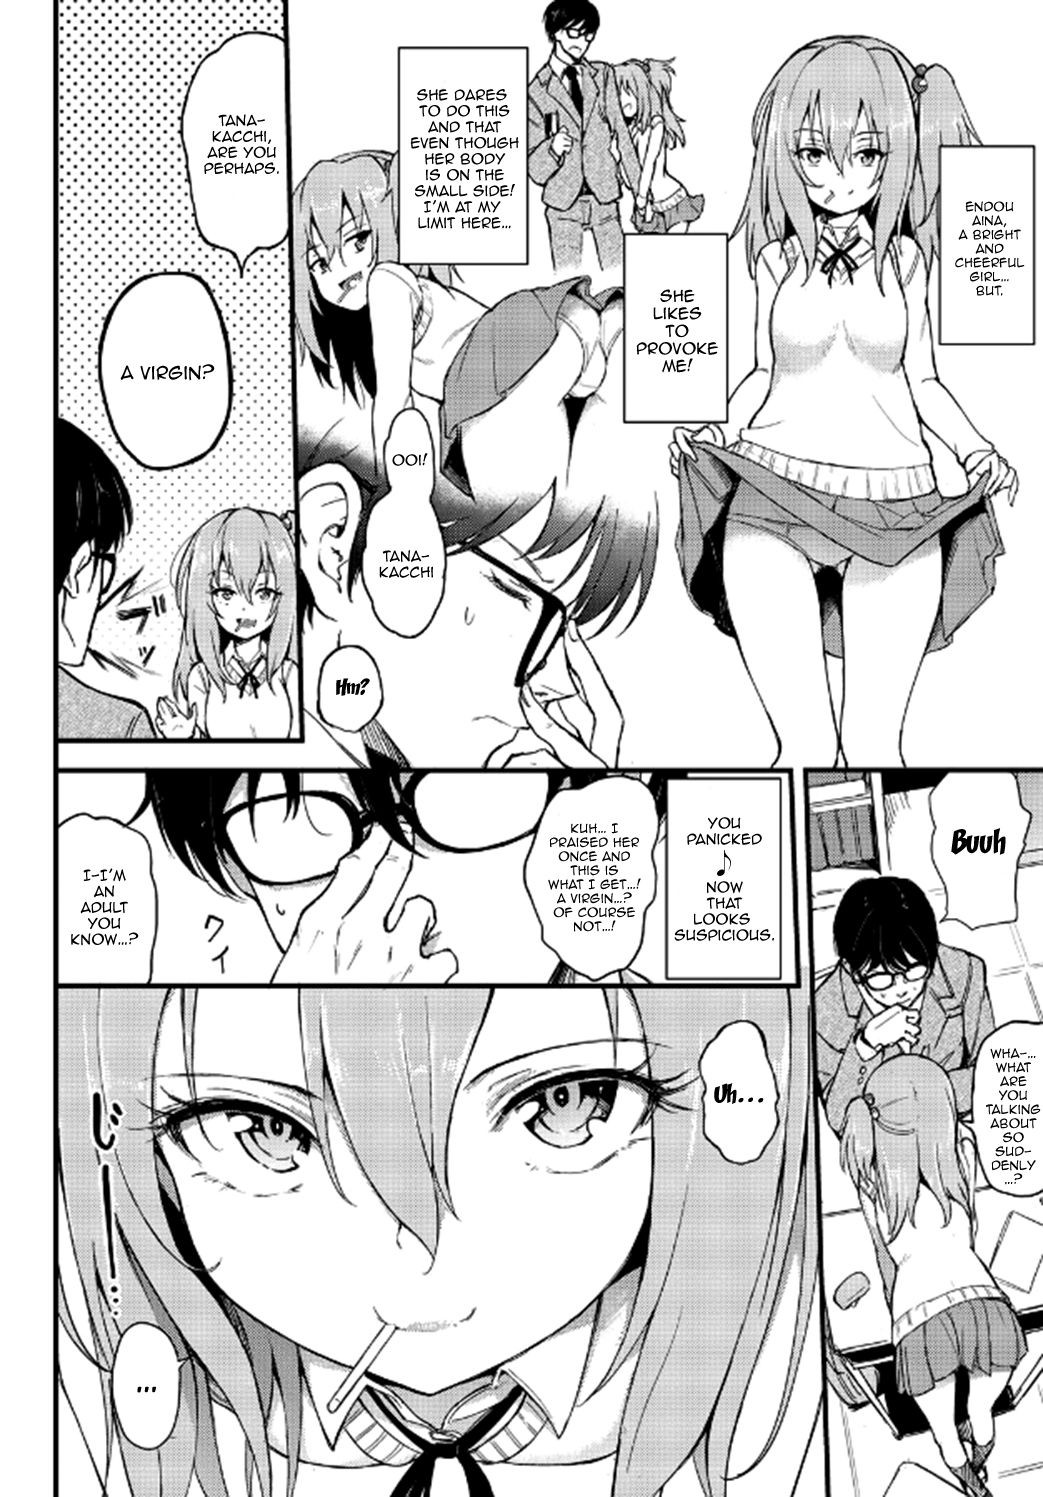 Lovely Aina-chan - Chapter 1 porn comic picture 4